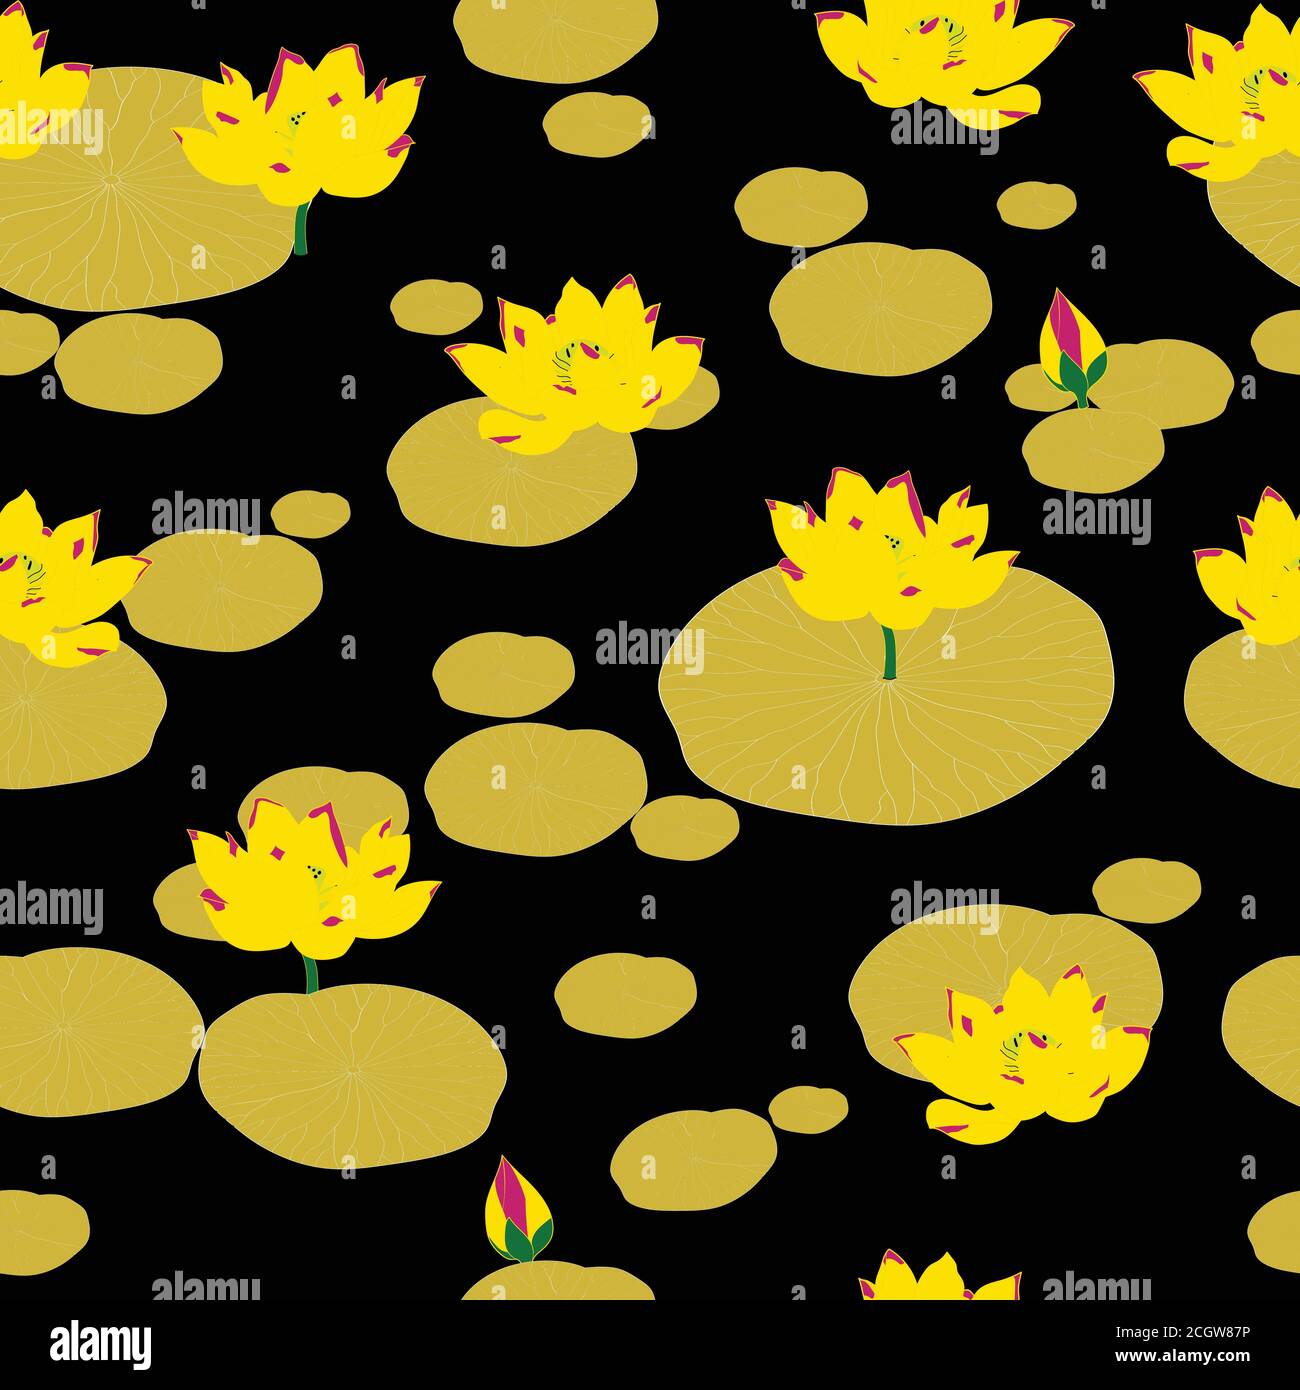 Lotus seamless pattern with Golden colors and black background Stock Vector